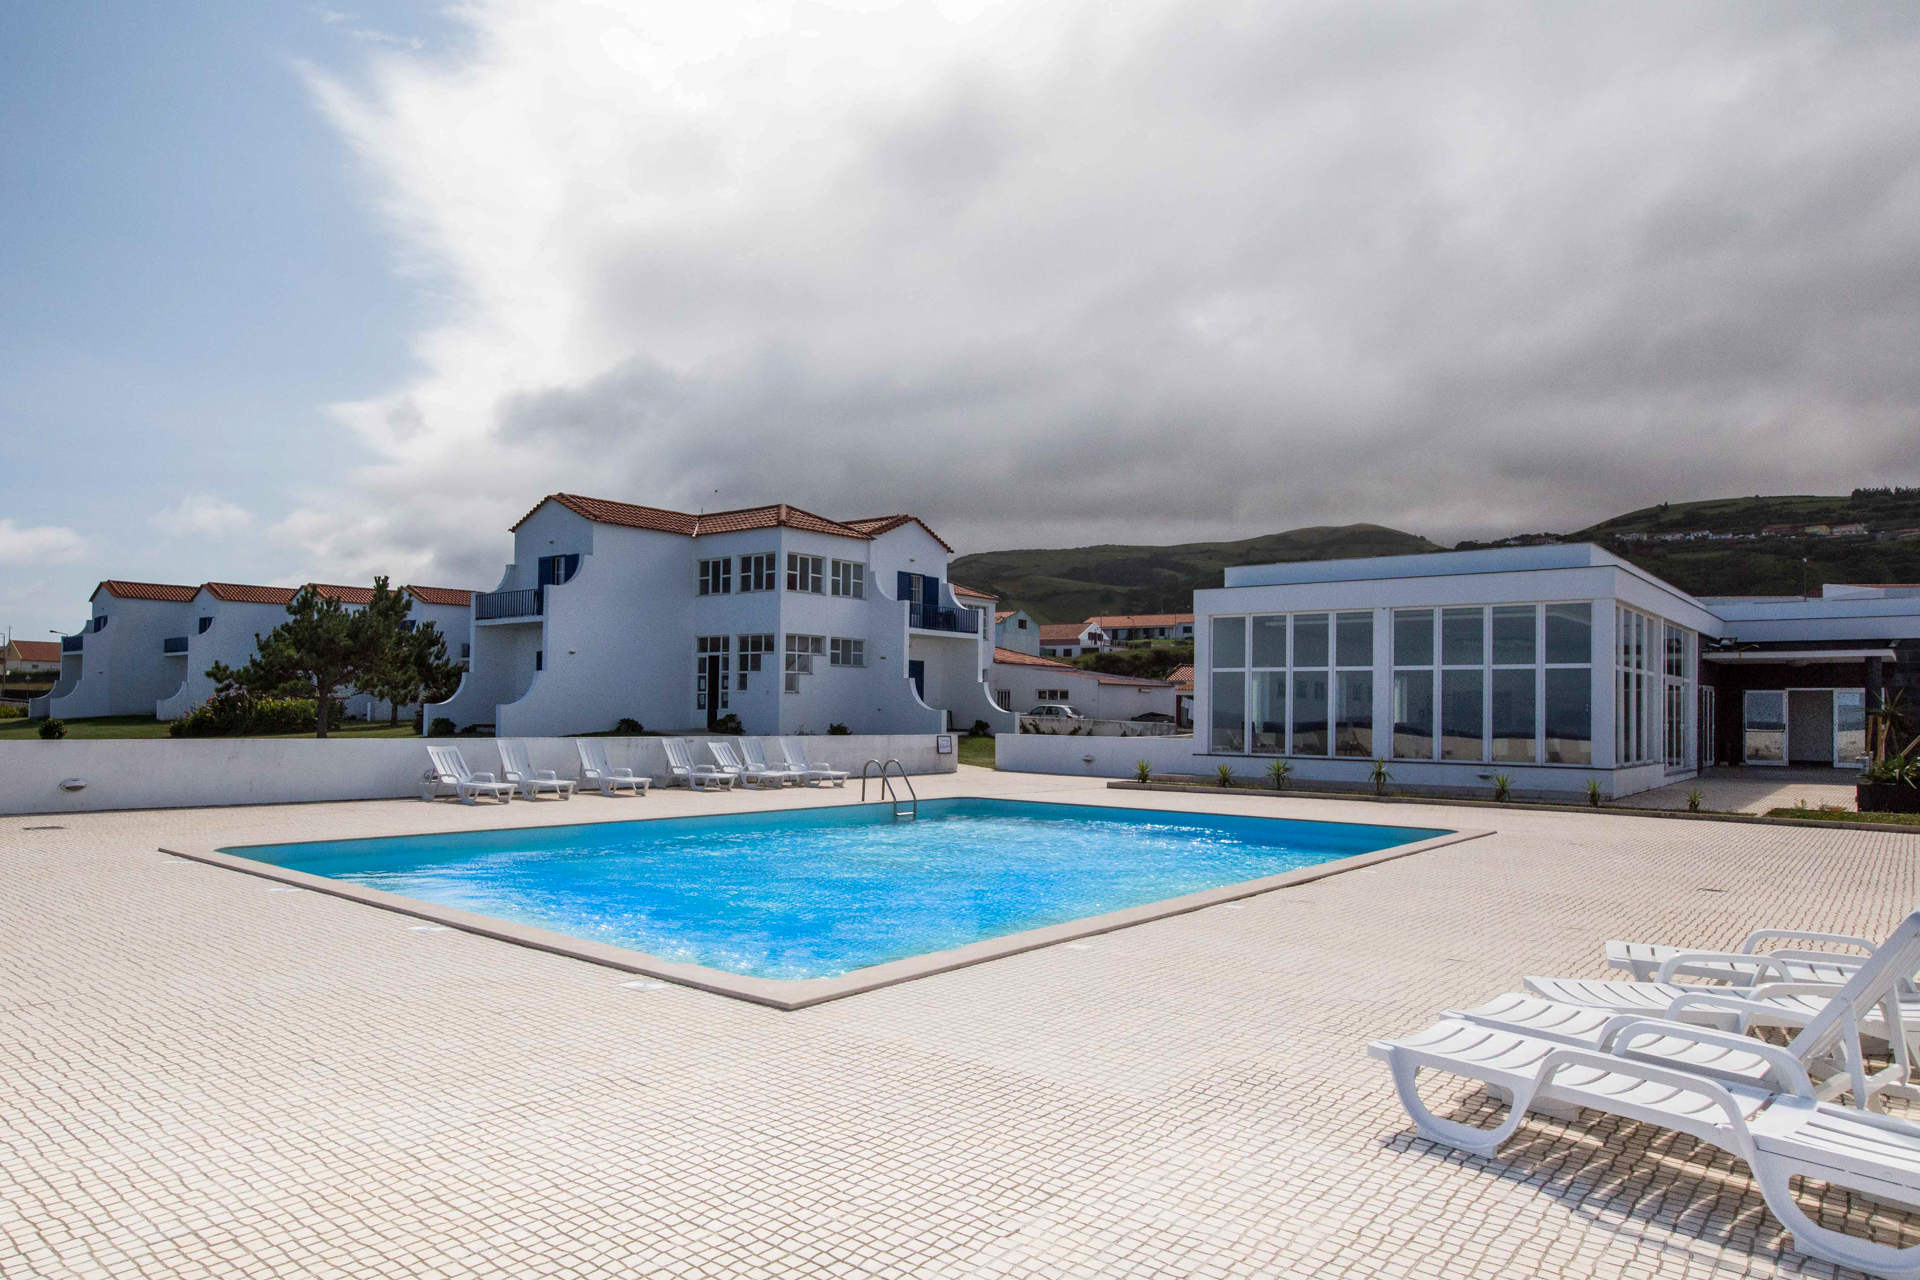 Hotel Ocidental swimming pool - Flores island Azores Portugal